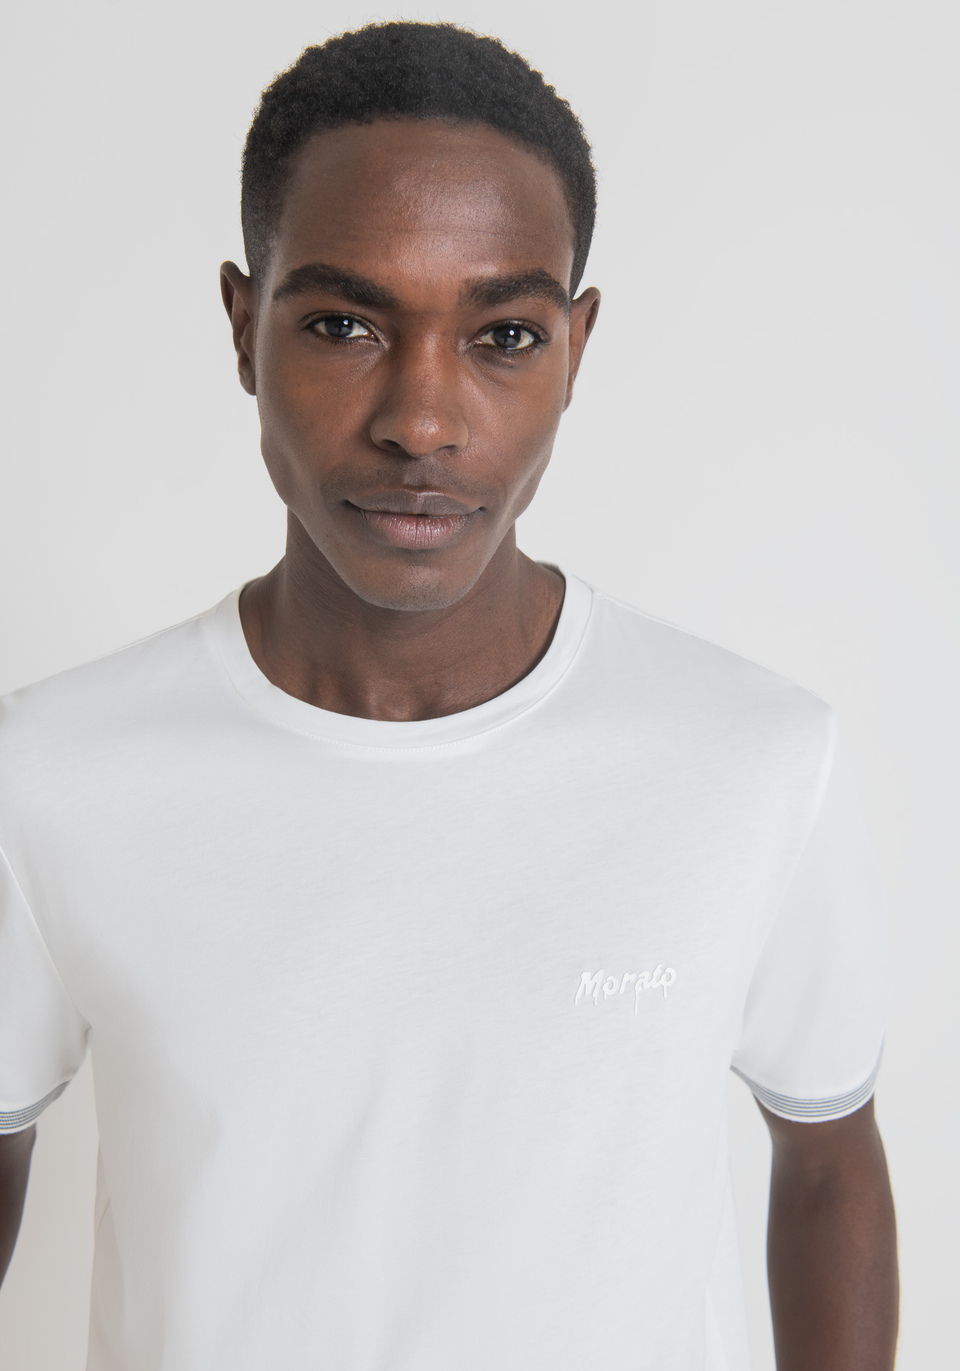 REGULAR-FIT T-SHIRT IN PURE COTTON WITH "MORATO" PRINT - Antony Morato Online Shop